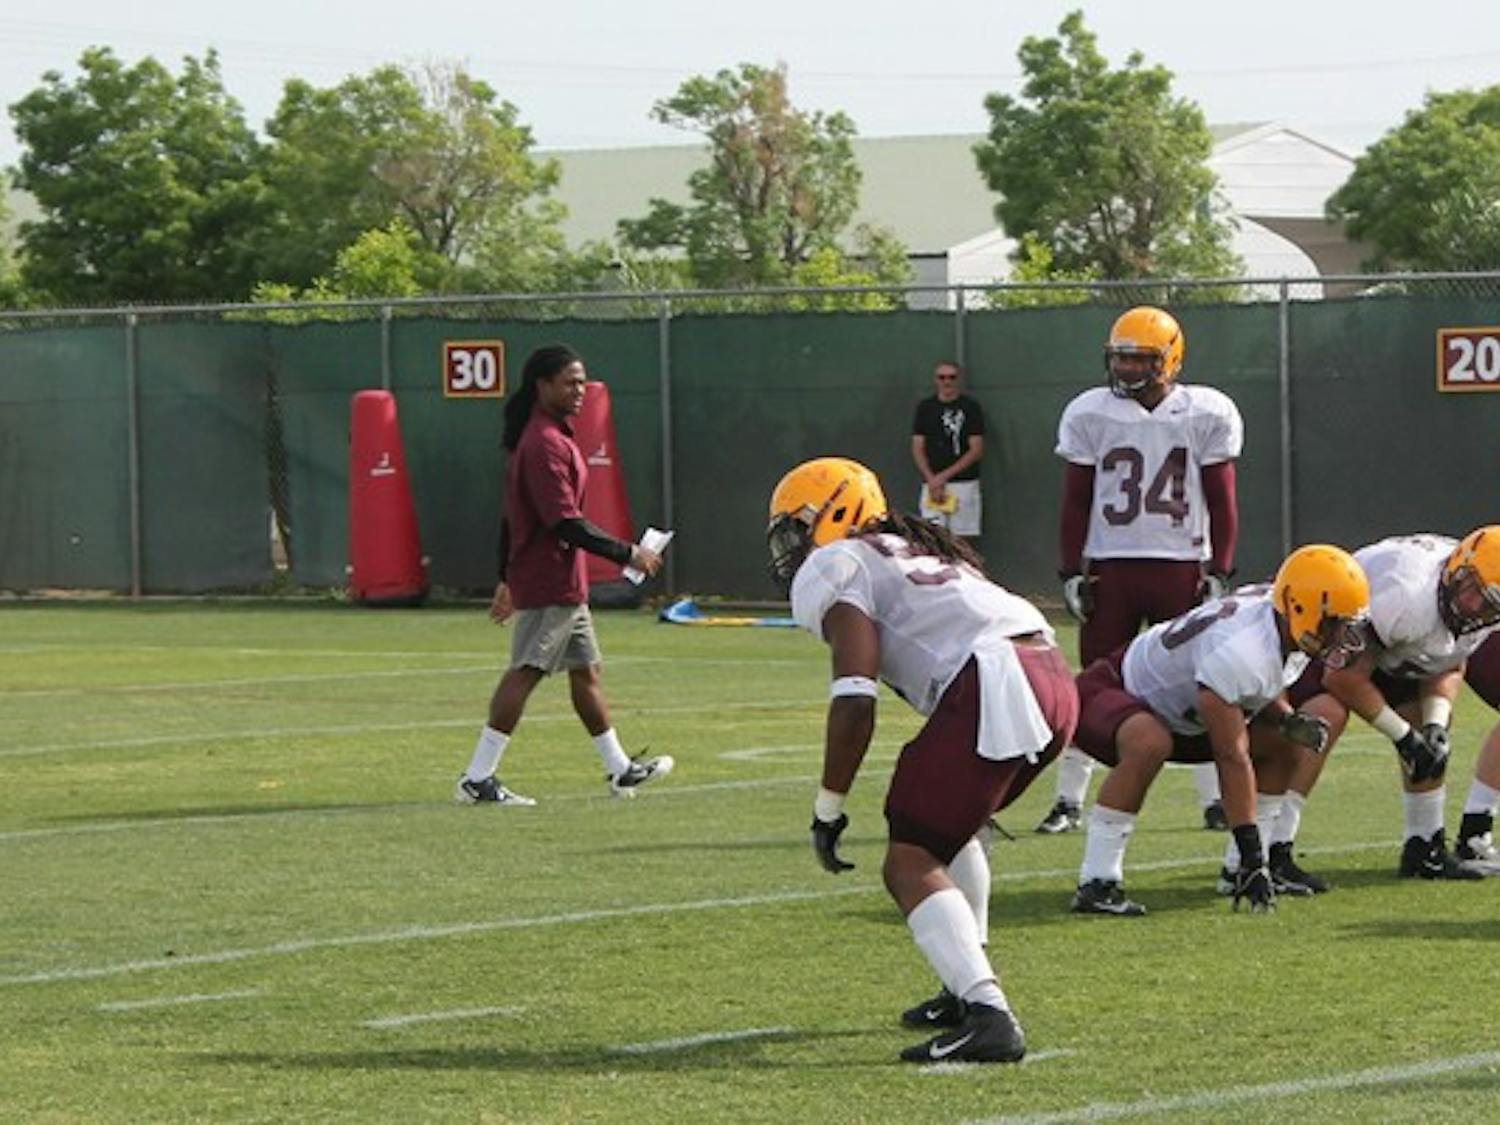 Redshirt senior linebacker Grandville Taylor watches for a snap during a special teams drill in practice on April 4. Taylor is hoping to work into the starting lineup for the Sun Devils in his last season. (Photo by Edmund J. Hubbard)